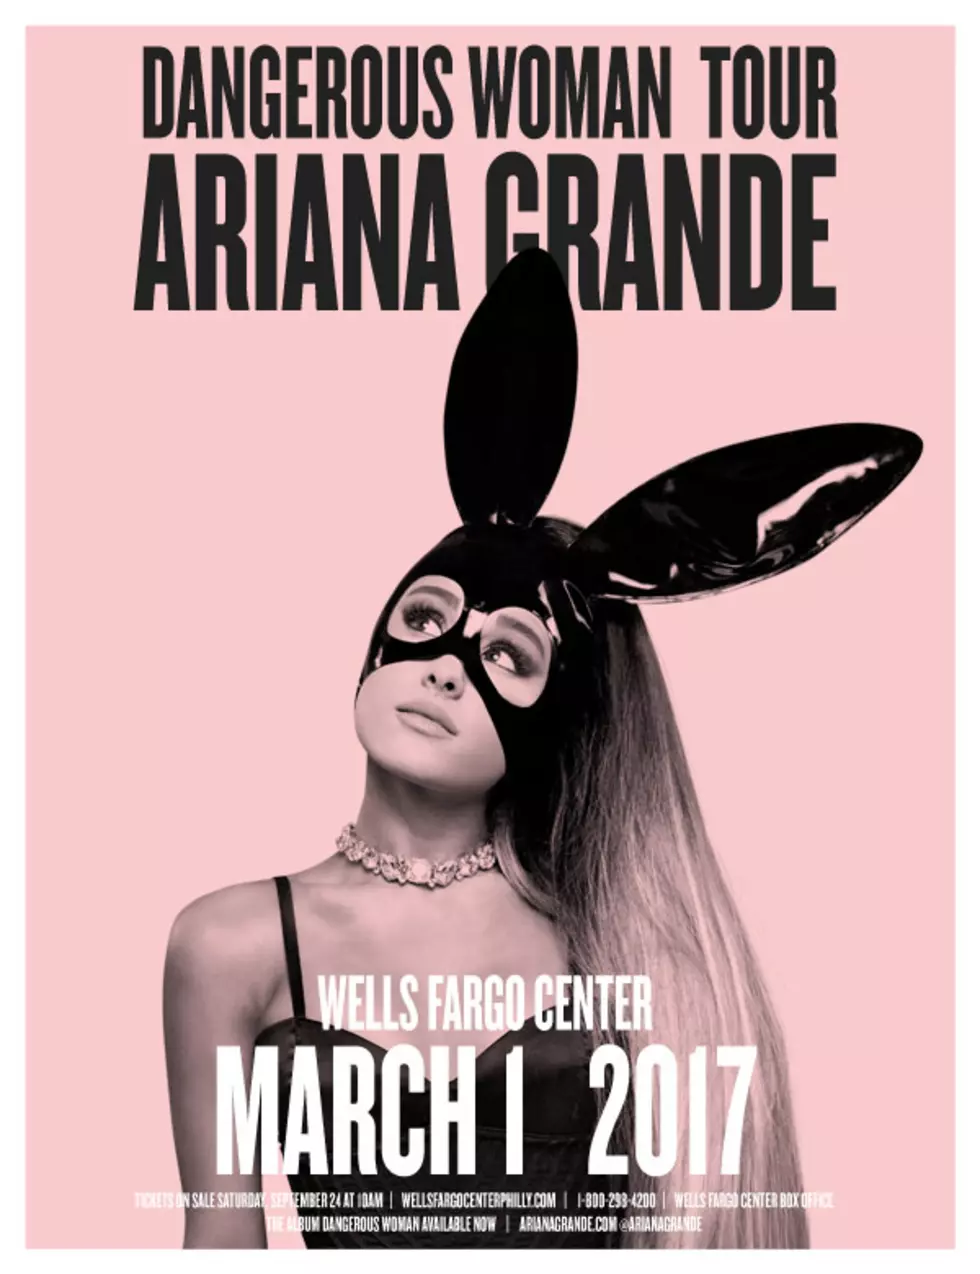 SoJO 104.9 Wants to Give You Ariana Grande Tickets Before They Even Go on Sale